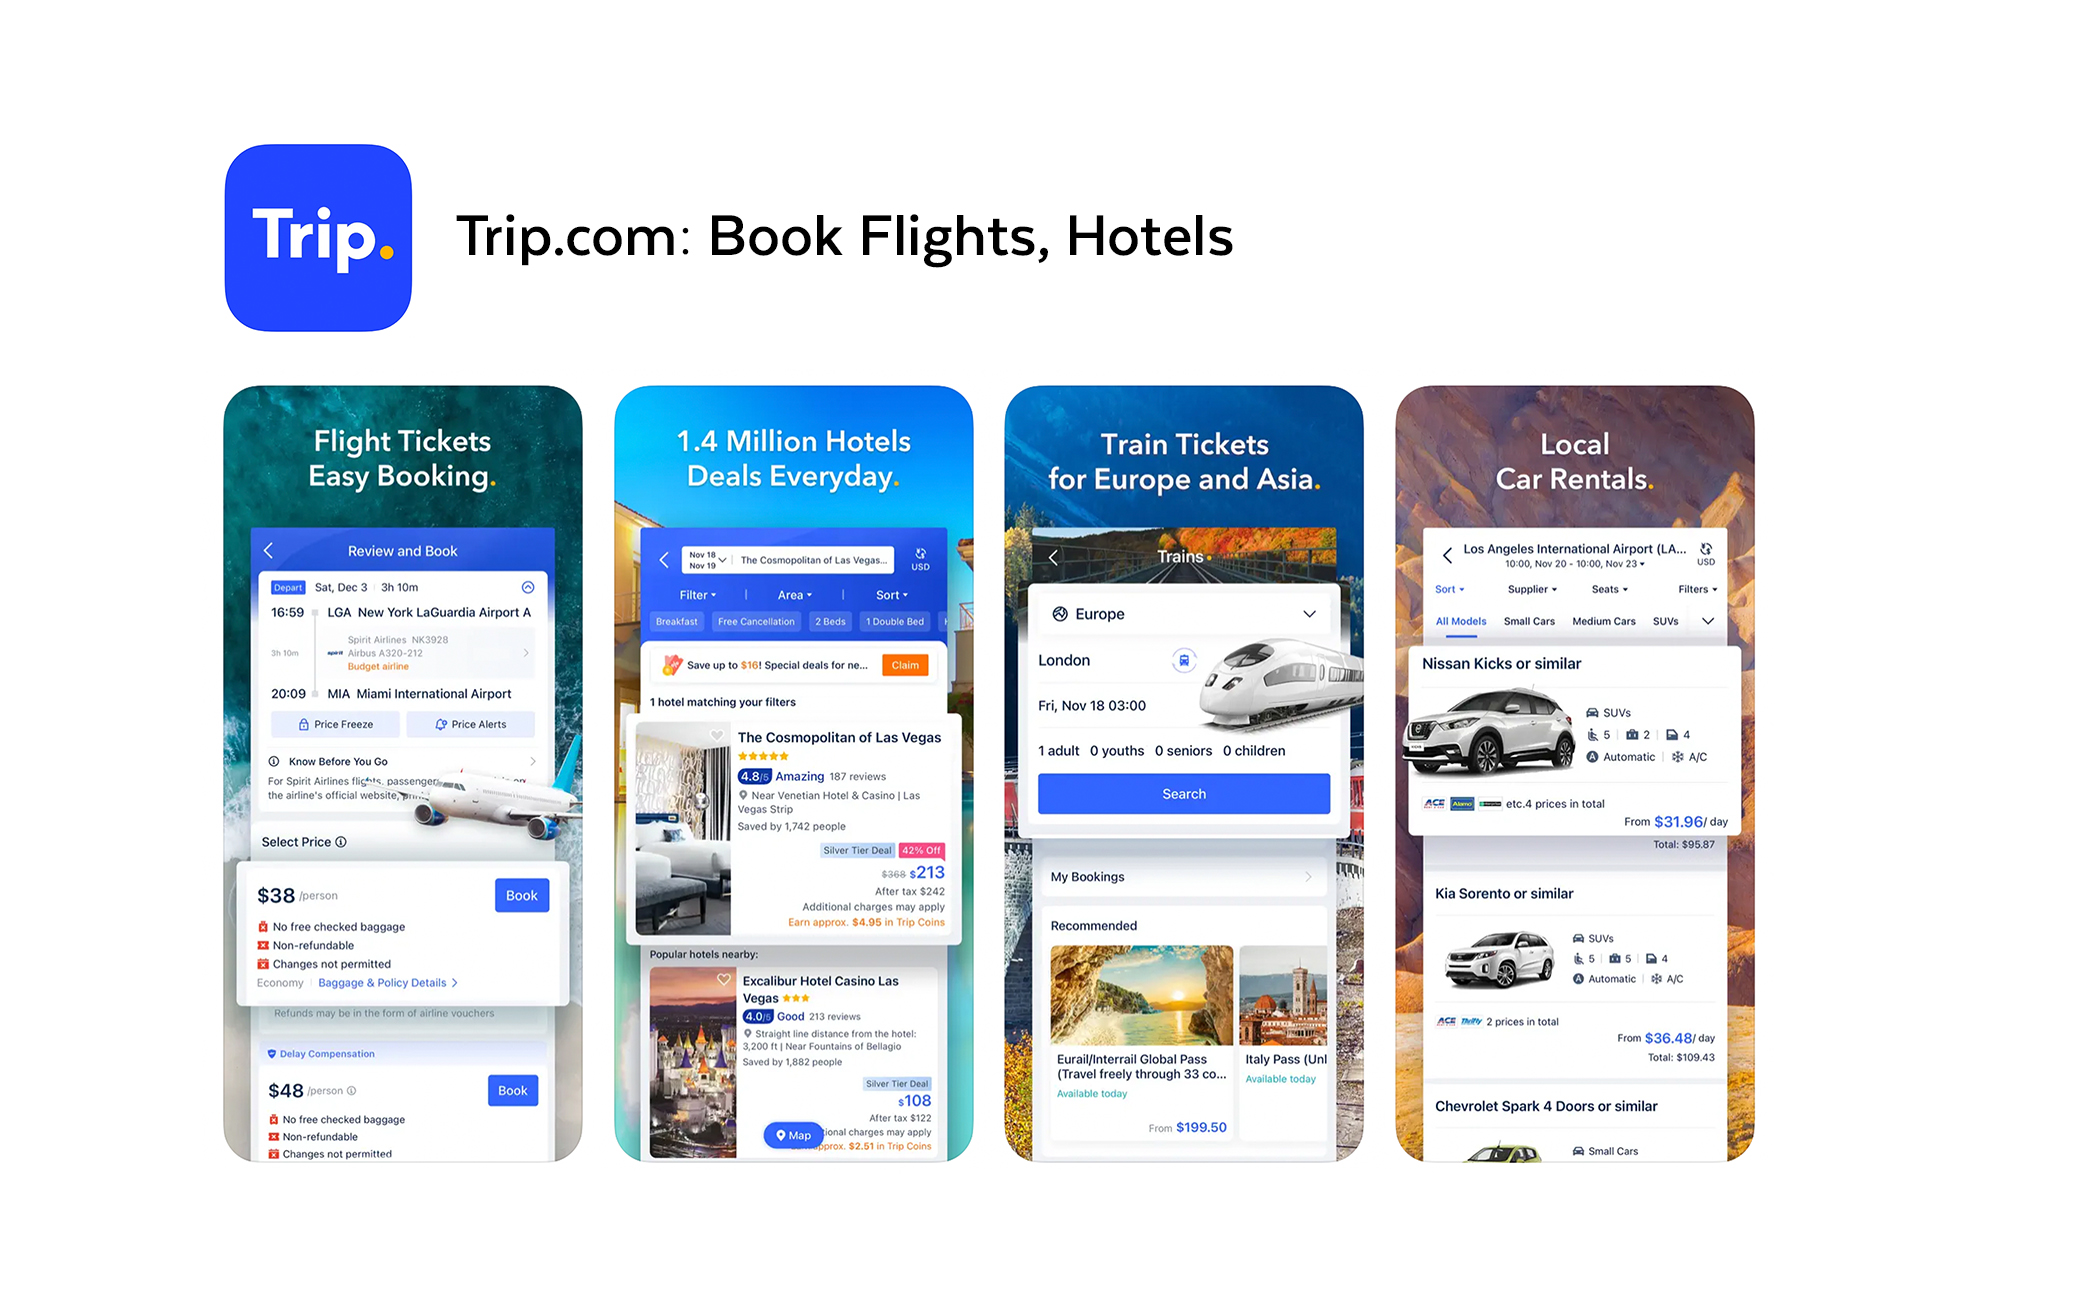 Ctrip is the most popular hotel booking app in China